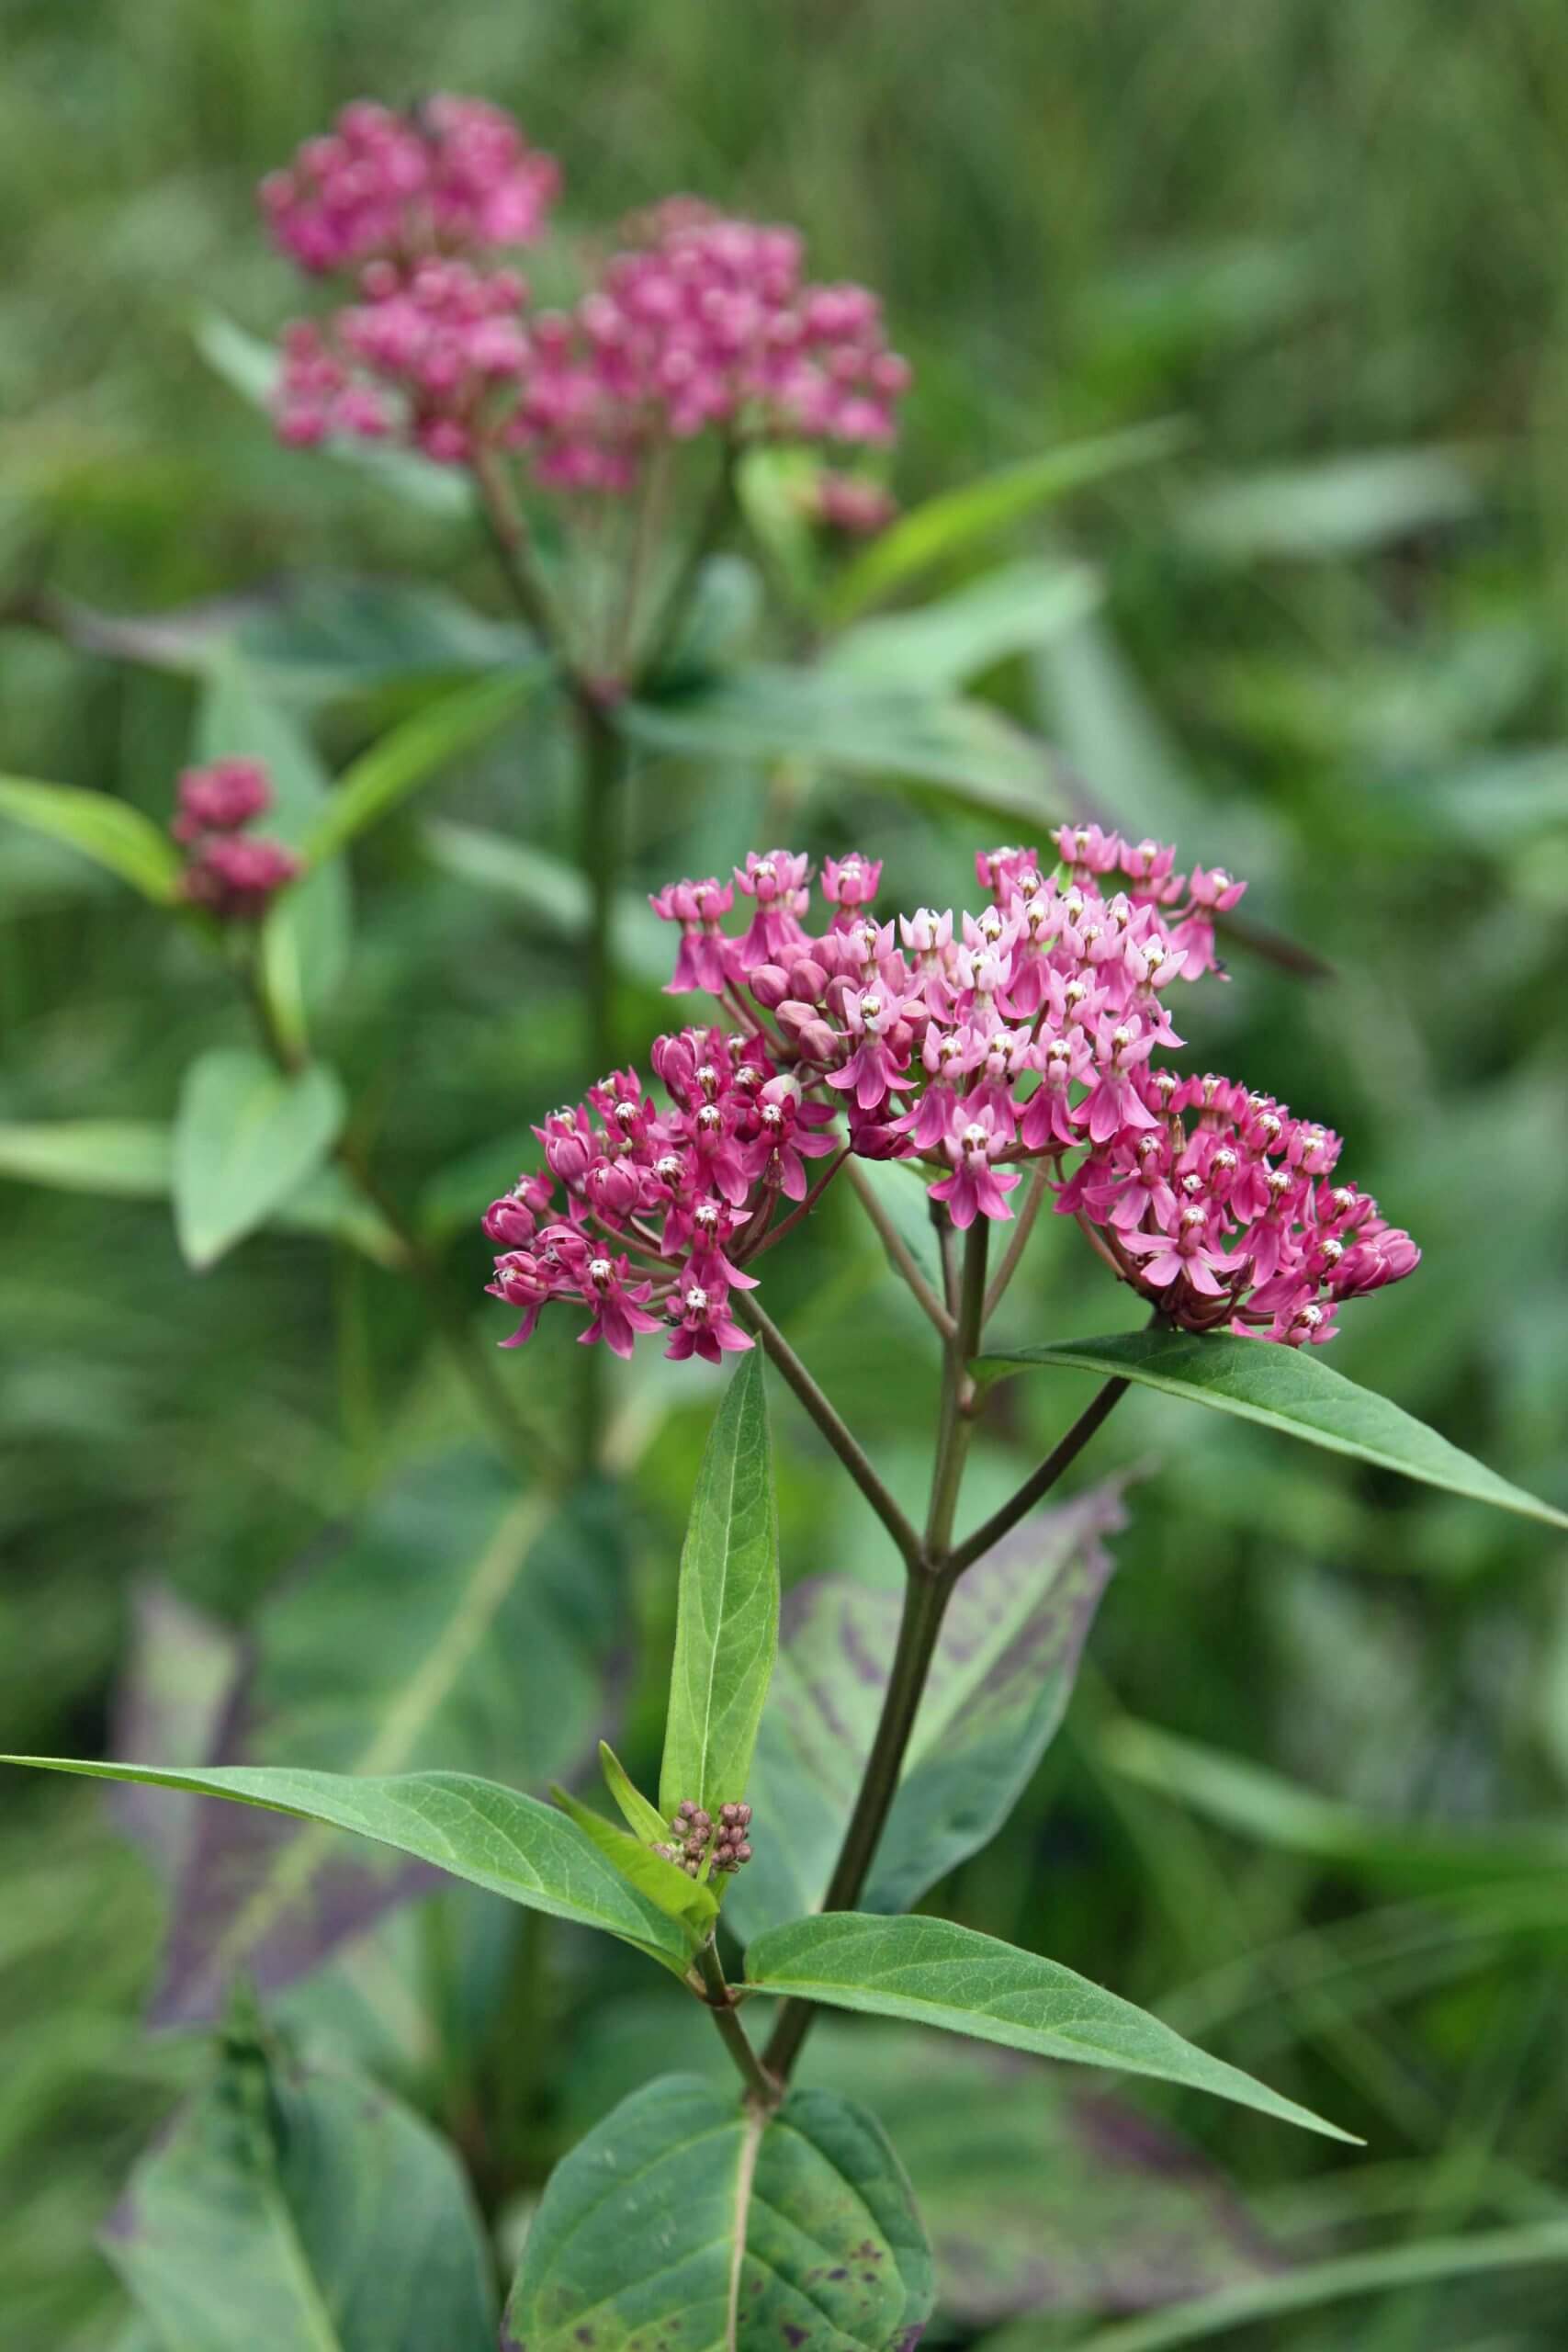 Swamp milkweed is a colorful long-bloomer that grows well in moist garden soils.